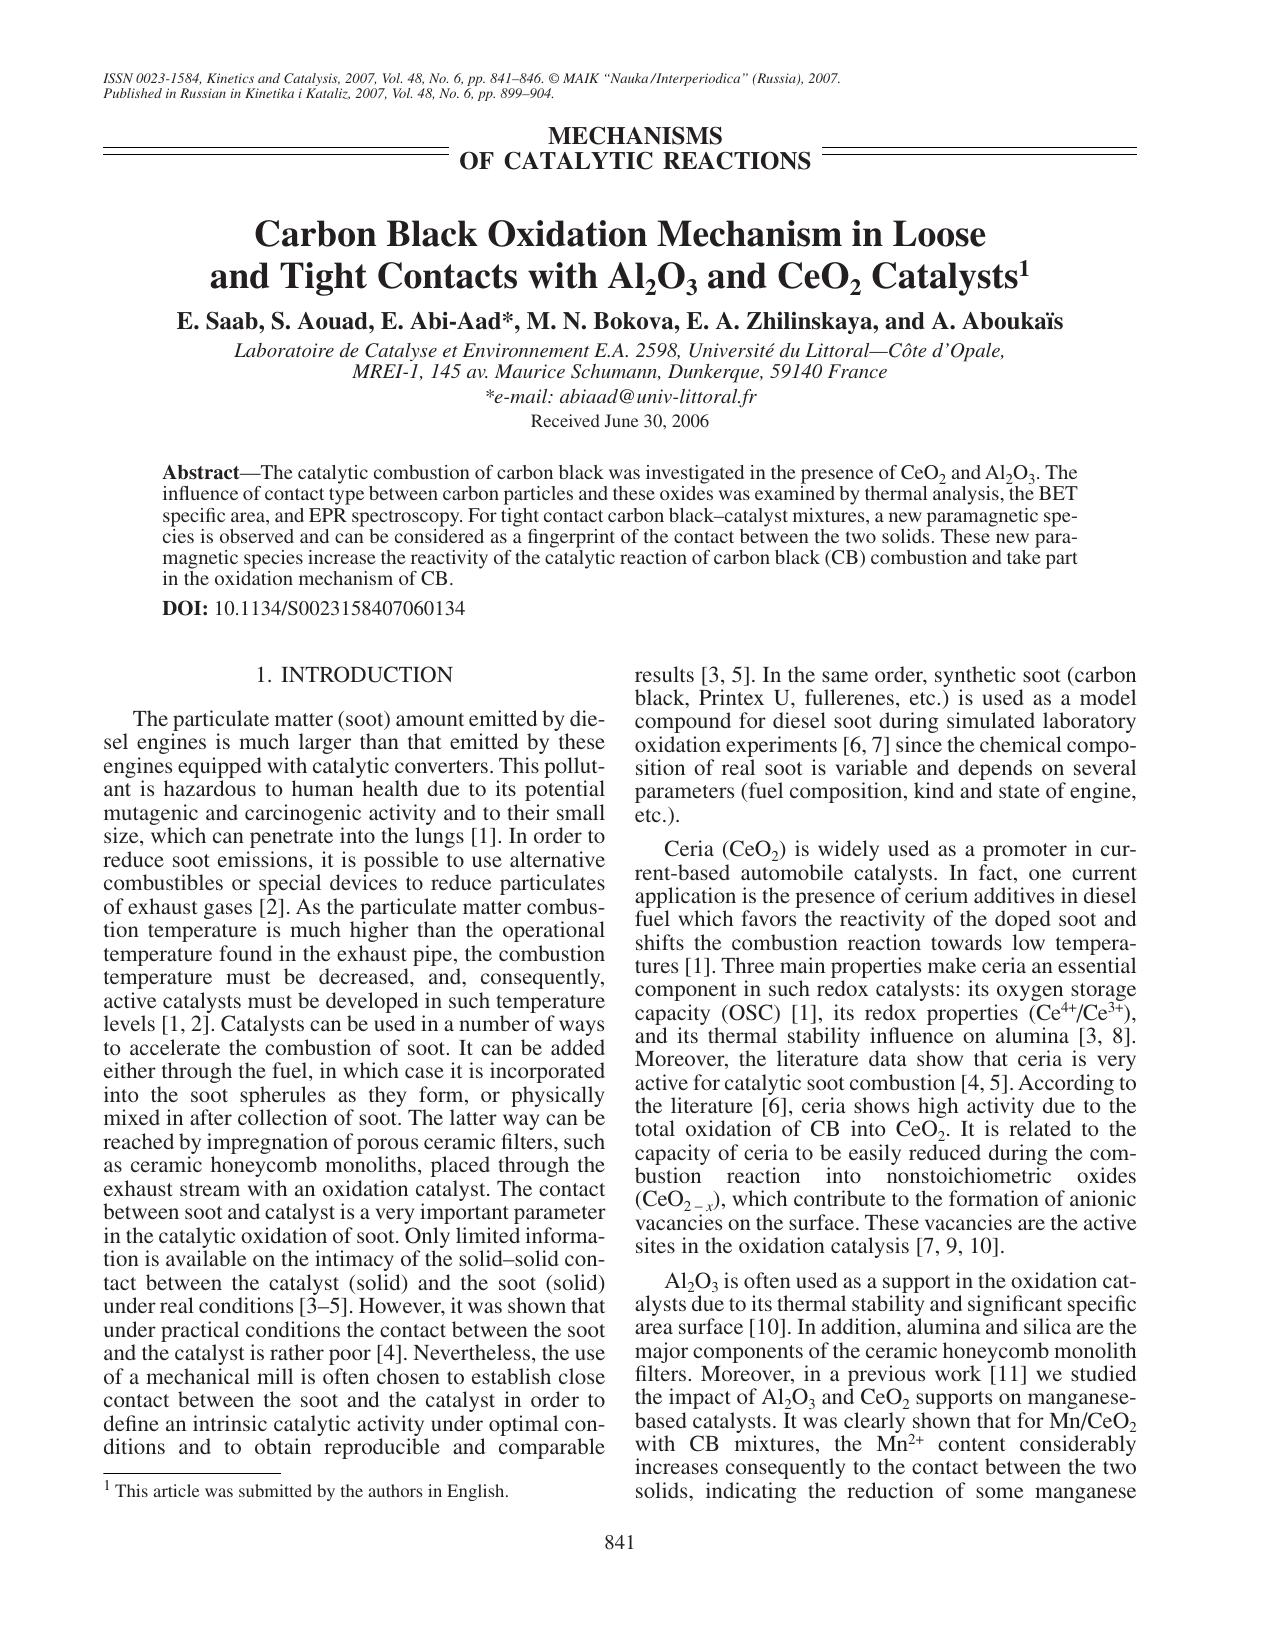 Carbon black oxidation mechanism in loose and tight contacts with Al<Subscript>2<Subscript>O<Subscript>3<Subscript> and CeO<Subscript>2<Subscript> catalysts by Unknown